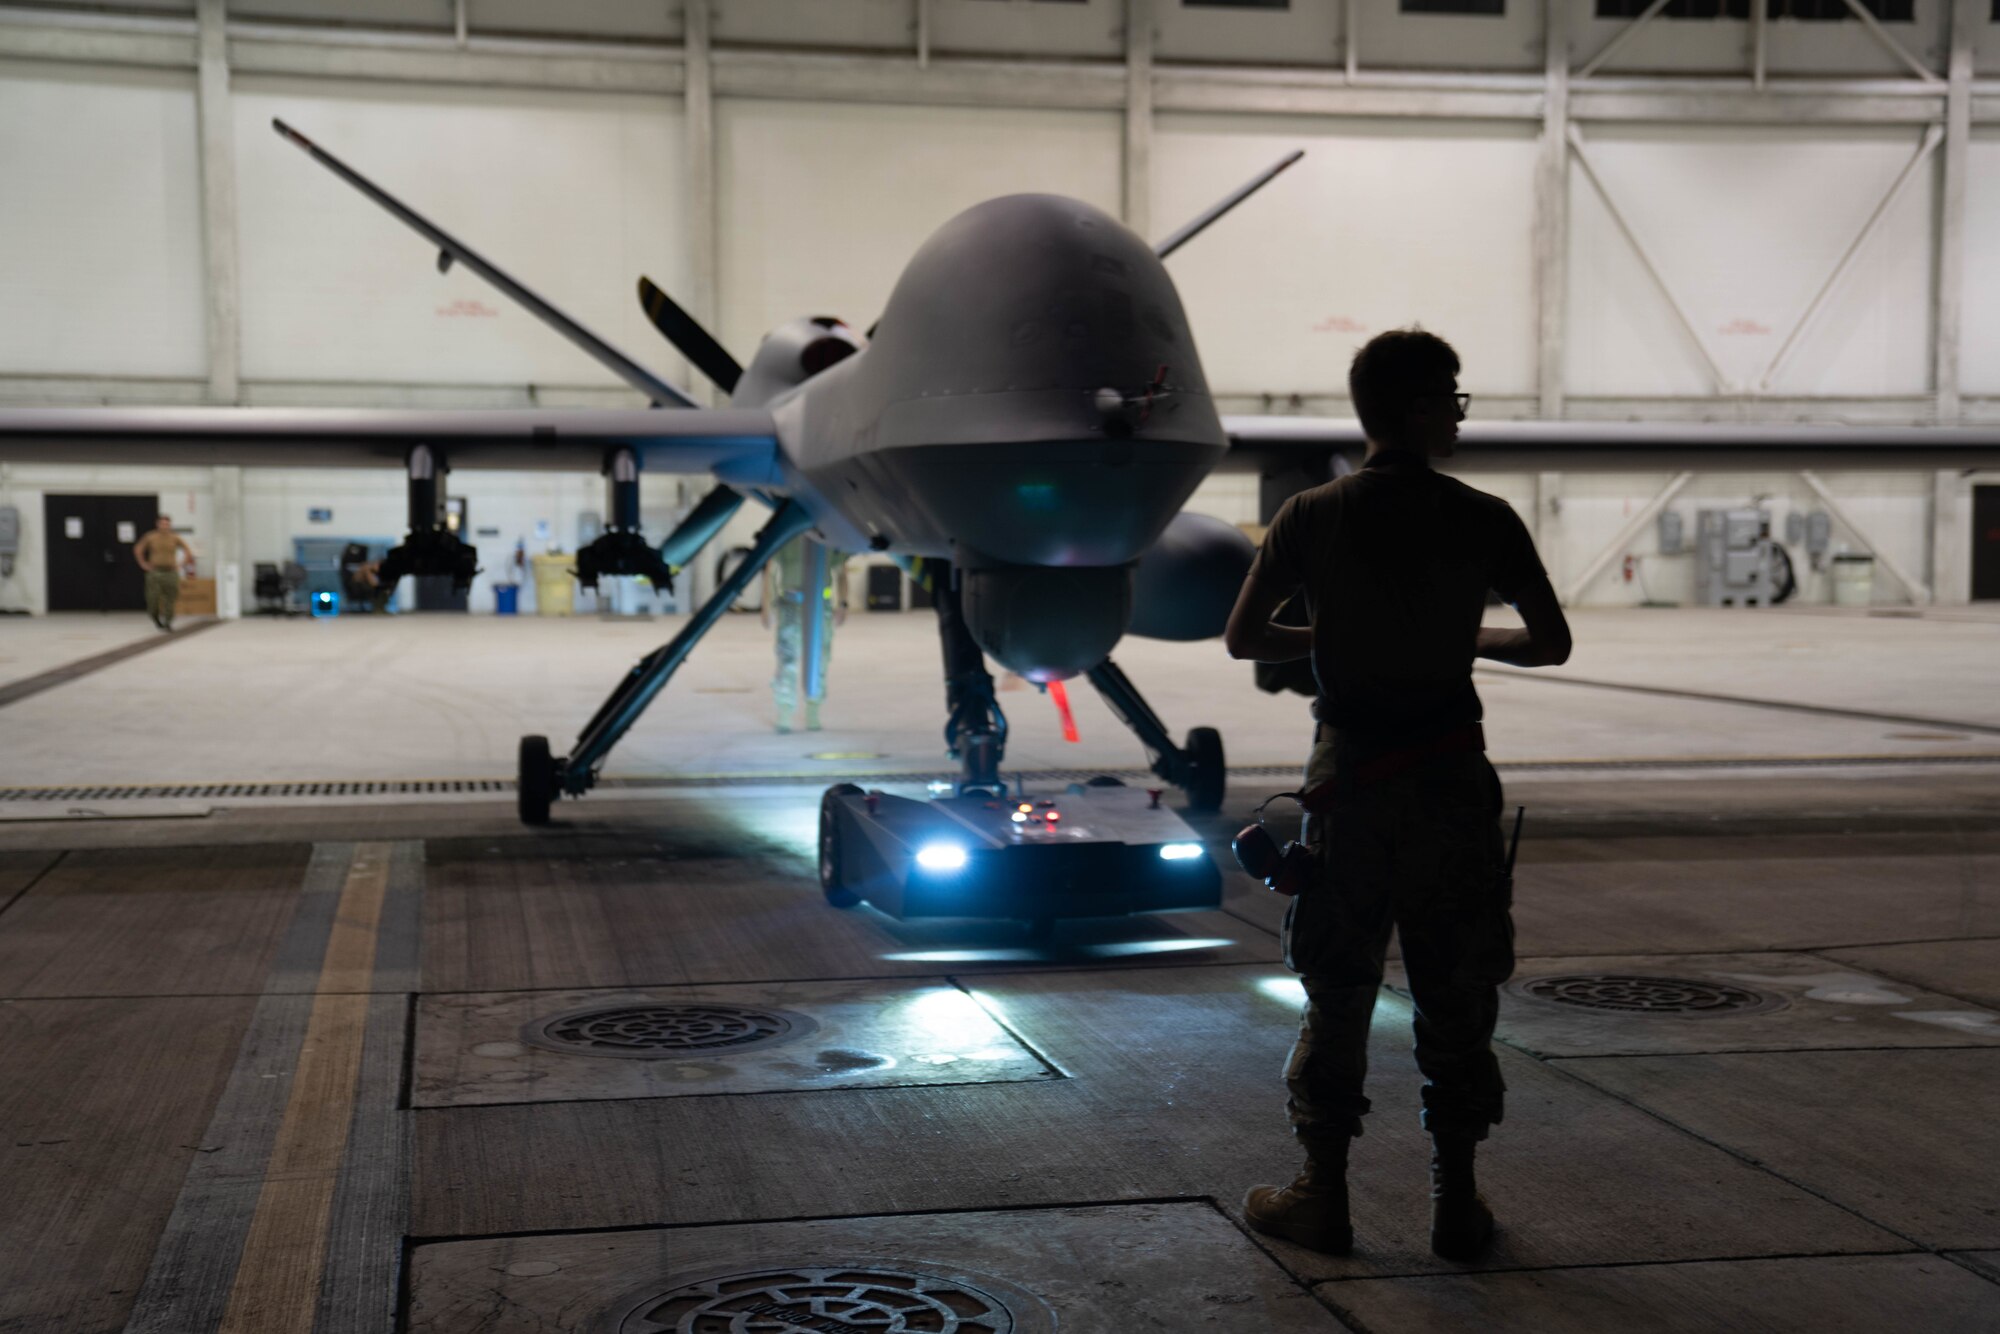 MARINE CORPS BASE HAWAII, Hawaii (July 13, 2022) - A U.S. Air Force maintainer, assigned to the 29th Air Maintenance Unit, tows the MQ-9A Reaper through the hangar at Marine Corps Air Station Kaneohe Bay during Rim of the Pacific (RIMPAC) 2022, July 13. Unmanned and remotely operated vessels extend the capability of interconnected manned platform sensors to enhance the warfighting capacity of multinational joint task forces. Twenty-six nations, 38 ships, four submarines, more than 170 aircraft and 25,000 personnel are participating in RIMPAC from June 29 to Aug. 4 in and around the Hawaiian Islands and Southern California. The world's largest international maritime exercise, RIMPAC provides a unique training opportunity while fostering and sustaining cooperative relationships among participants critical to ensuring the safety of sea lanes and security on the world's oceans. RIMPAC 2022 is the 28th exercise in the series that began in 1971. (U.S. Air Force photo by Airman 1st Class Ariel O'Shea)